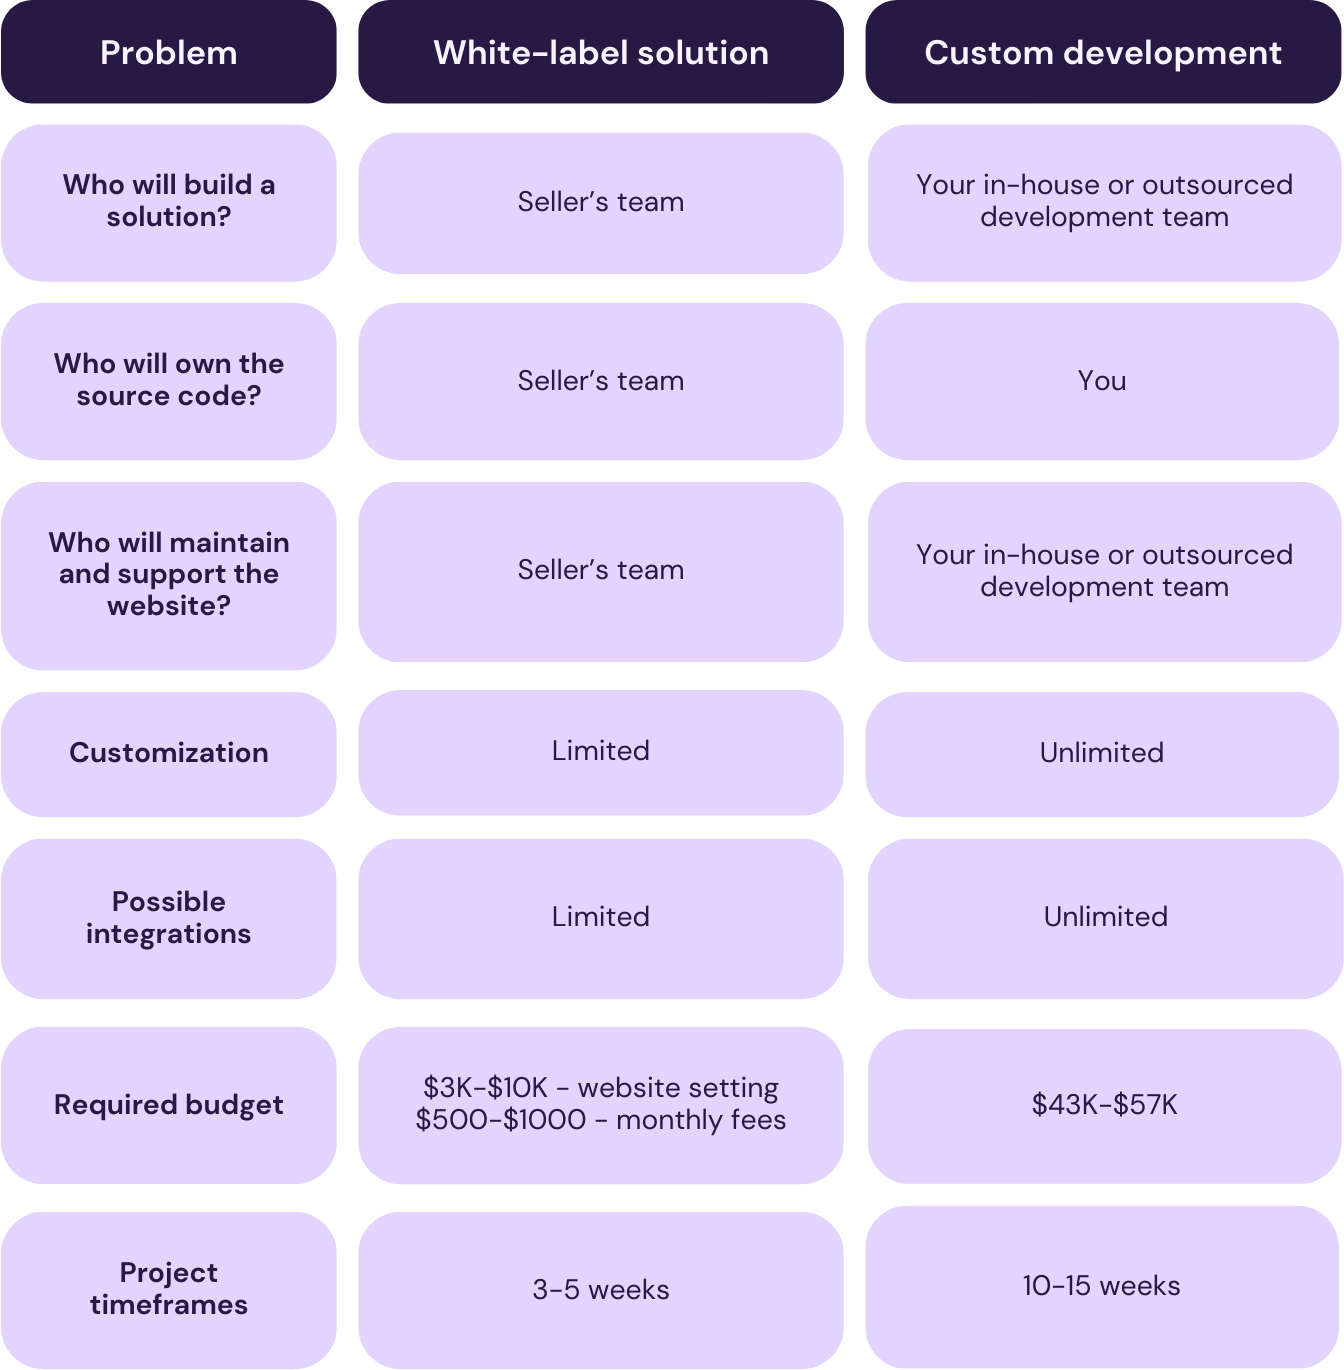 This table compares two different approaches to website development: purchasing a white-label solution and developing a website from scratch. In the white-label solution column, the table indicates that the solution will be built by the seller's team, the source code will be owned by the seller, and the website's maintenance and support will be managed by the seller's team. The customization and possible integrations with other systems are limited in this approach. The required budget for a white-label solution typically ranges from $3K-$10K for initial setup, with recurring monthly fees of $500-$1000. The project's timeframe for a white-label solution typically takes between 3-5 weeks. On the other hand, in the 'development from scratch' column, the solution will be built by your in-house or outsourced development team. The source code will be owned by you, and the maintenance and support of the website will also be handled by your in-house or outsourced team. The customization and possible integrations with other systems are unlimited in this approach. The required budget for developing a website from scratch is typically between $43K-$57K. The project's timeframe for developing a website from scratch is usually between 10-15 weeks.